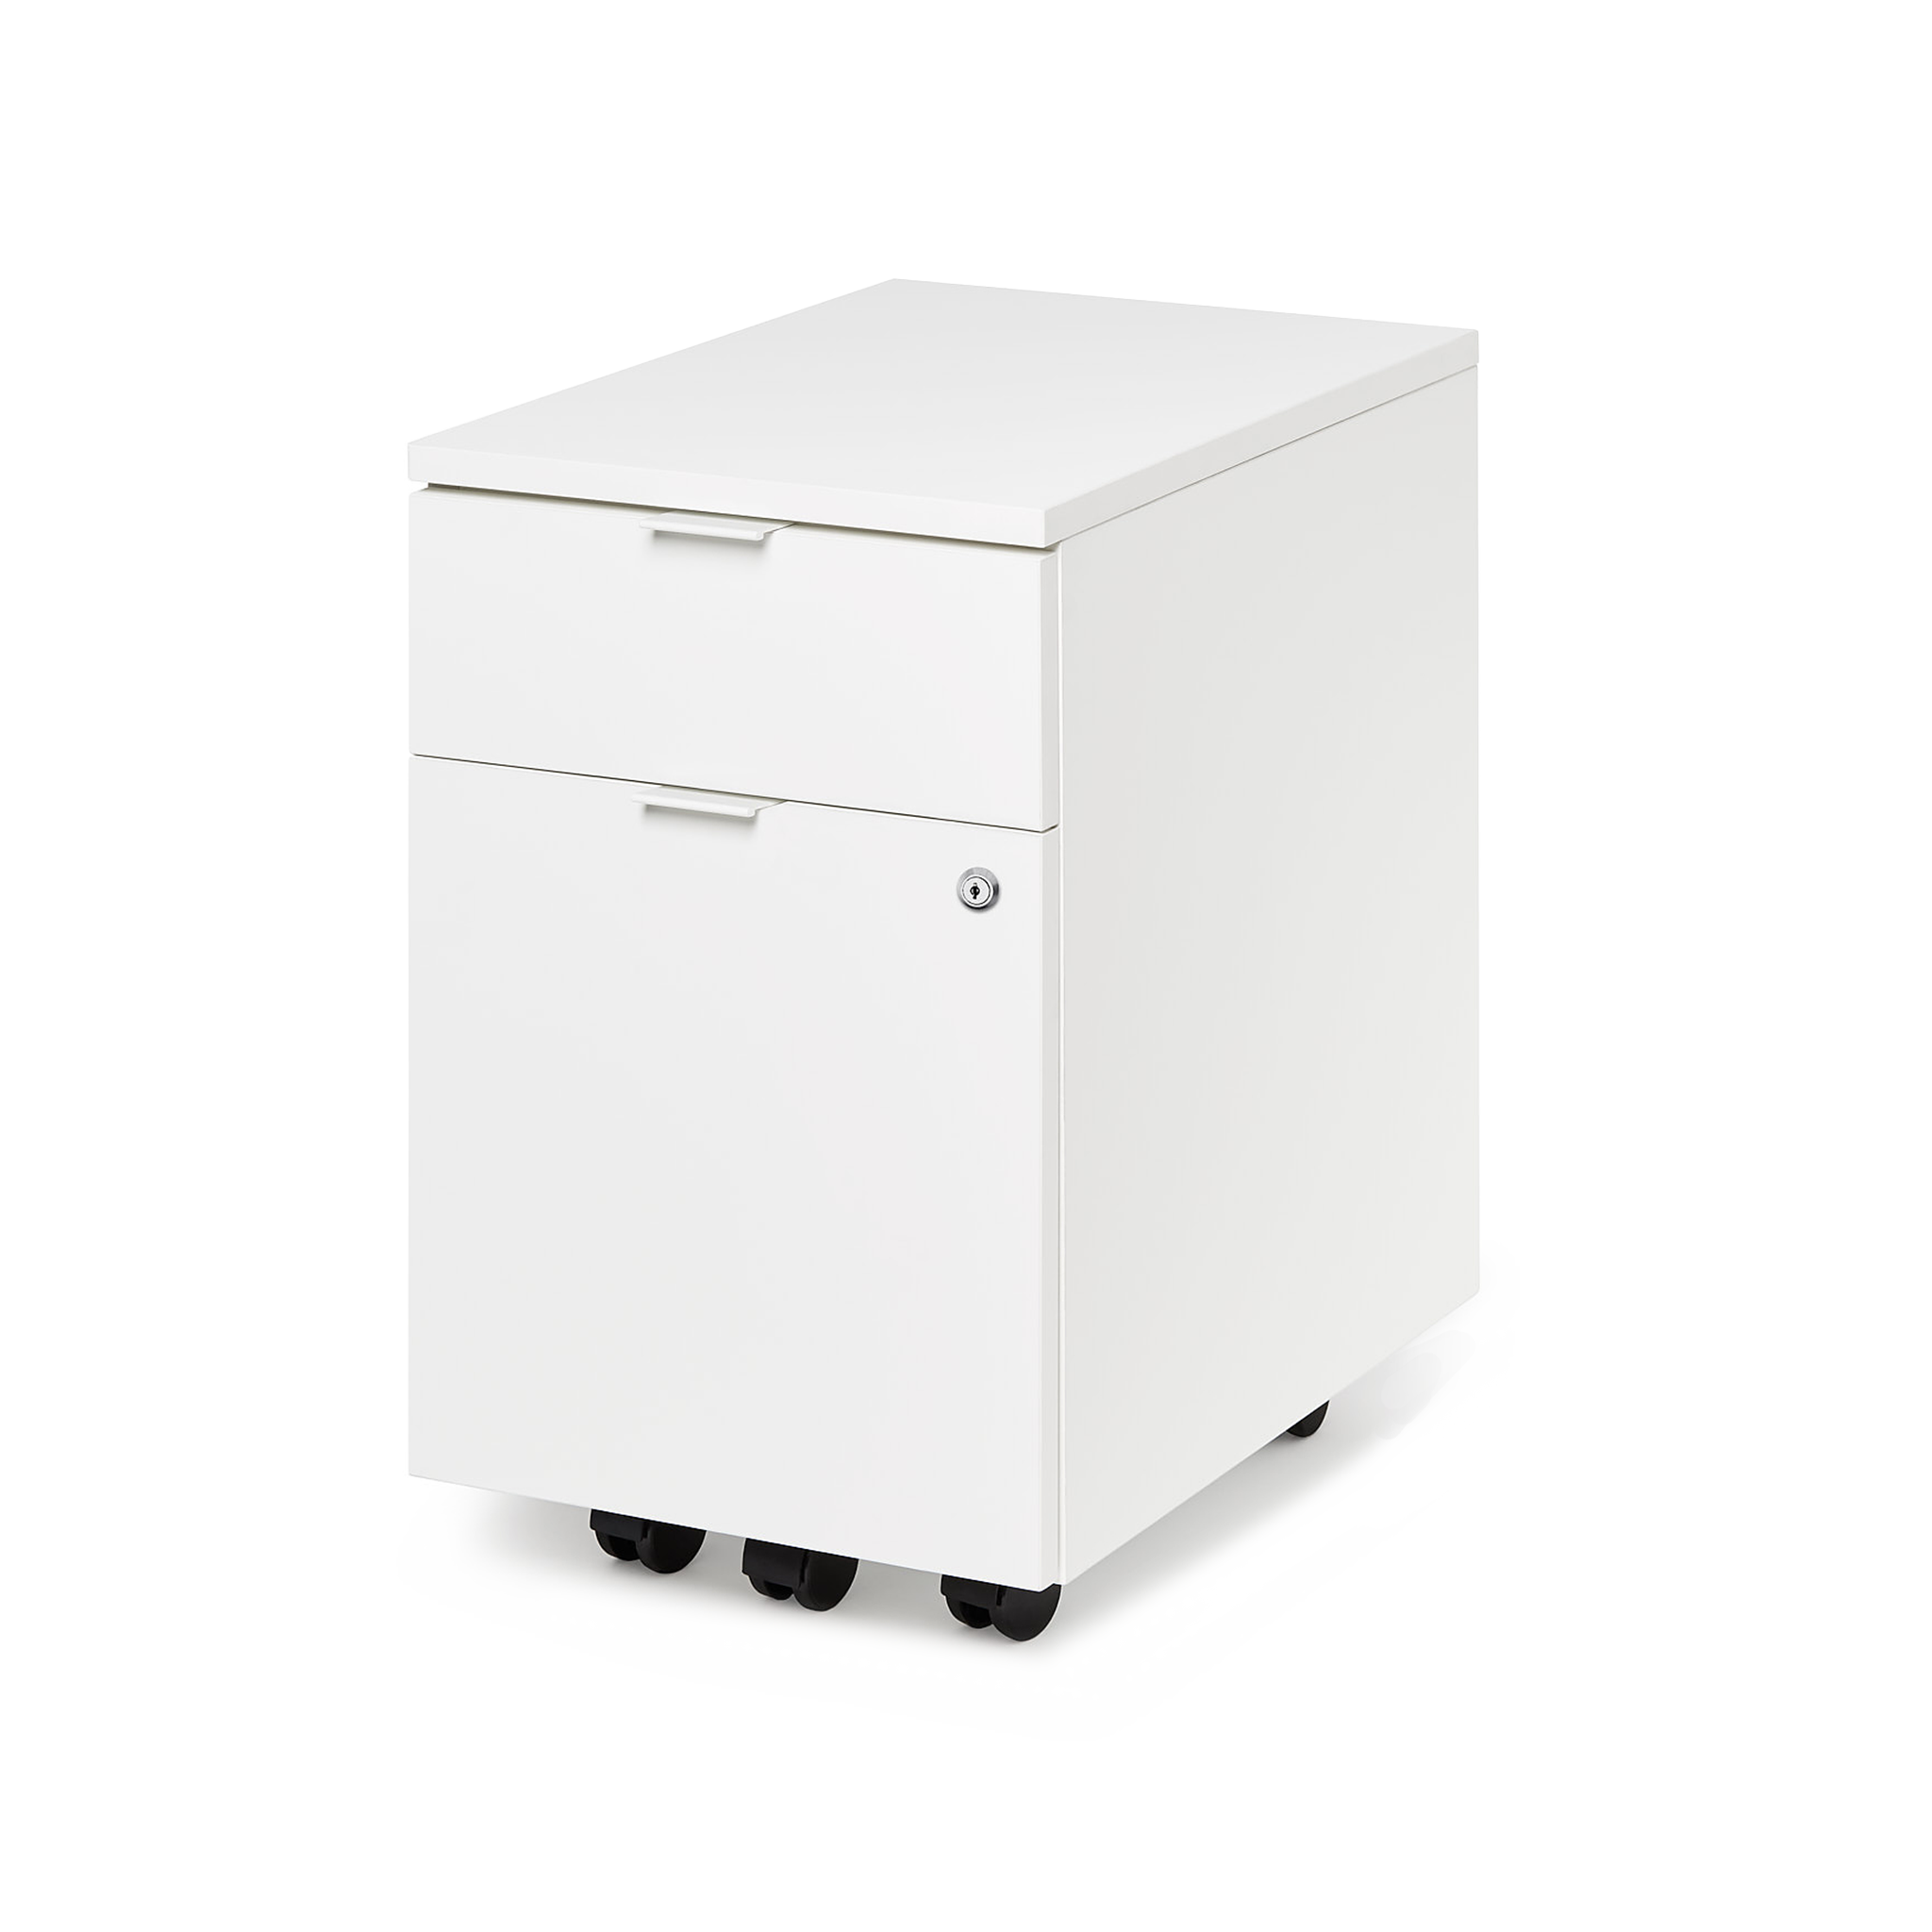 Almost Perfect Neat Filing Cabinet - White-White - Blanc-Blanc